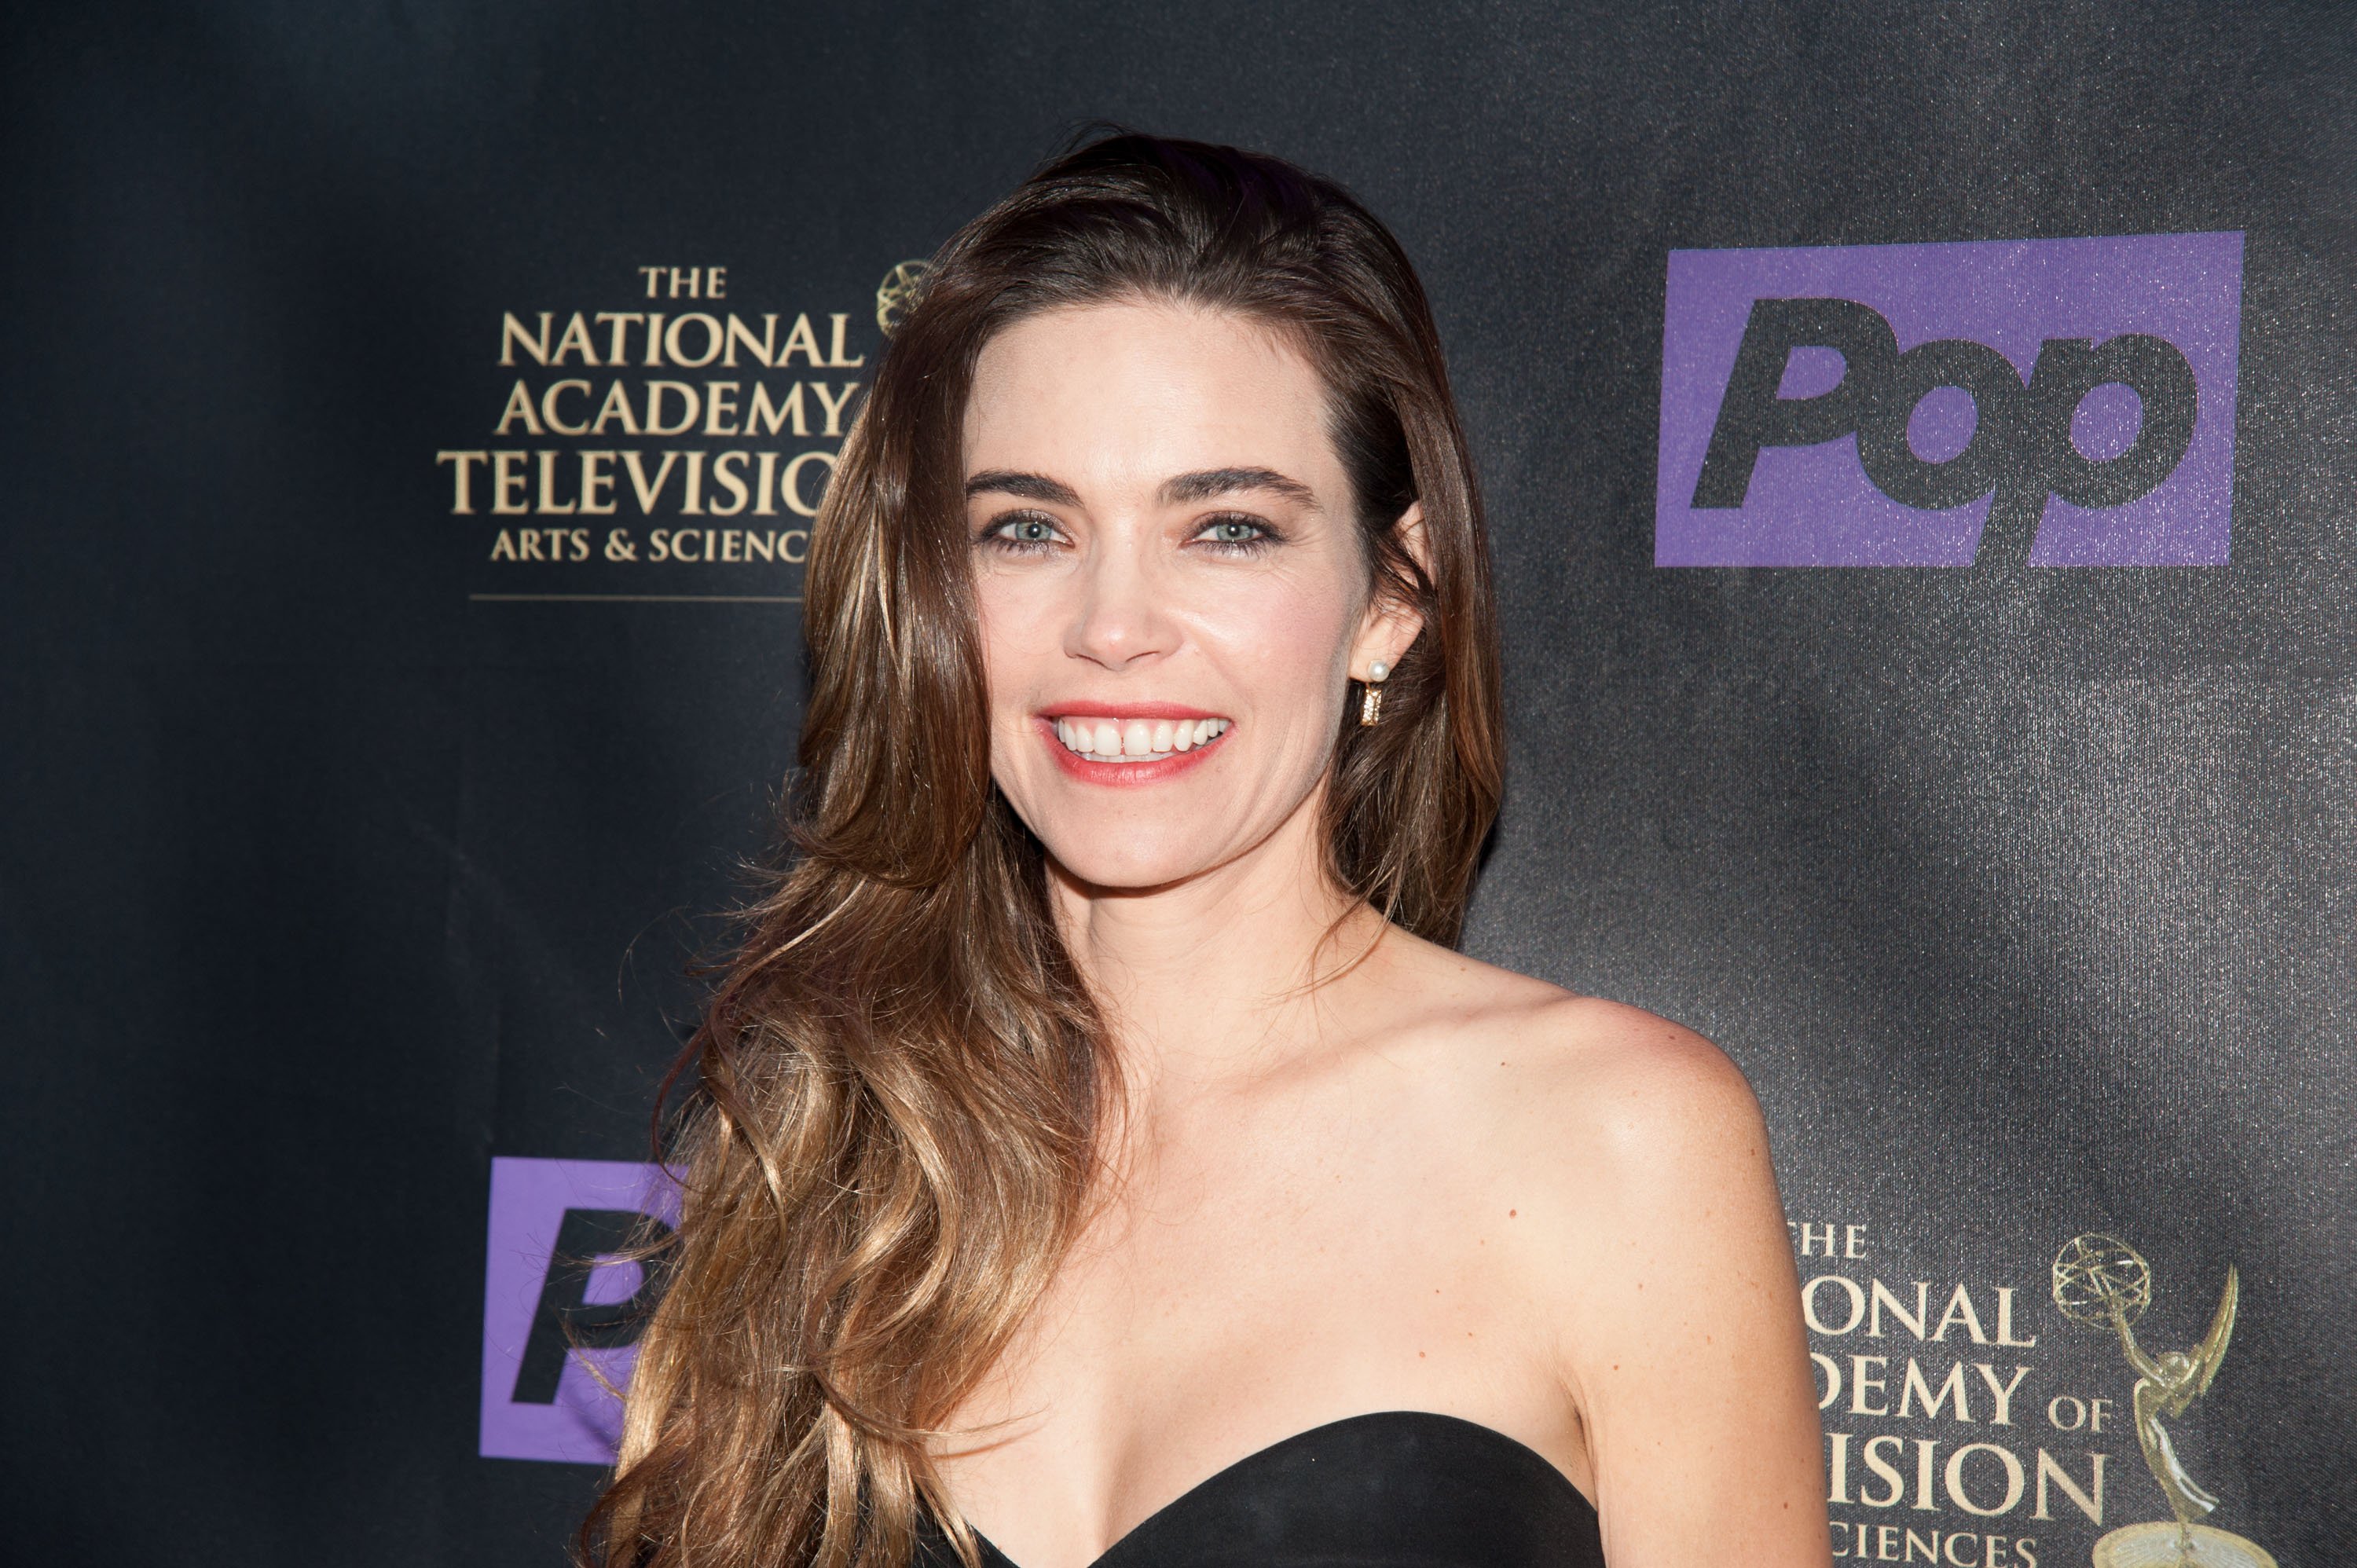 'The Young and the Restless' star Amelia Heinle wearing a black strapless dress and posing for photographers.